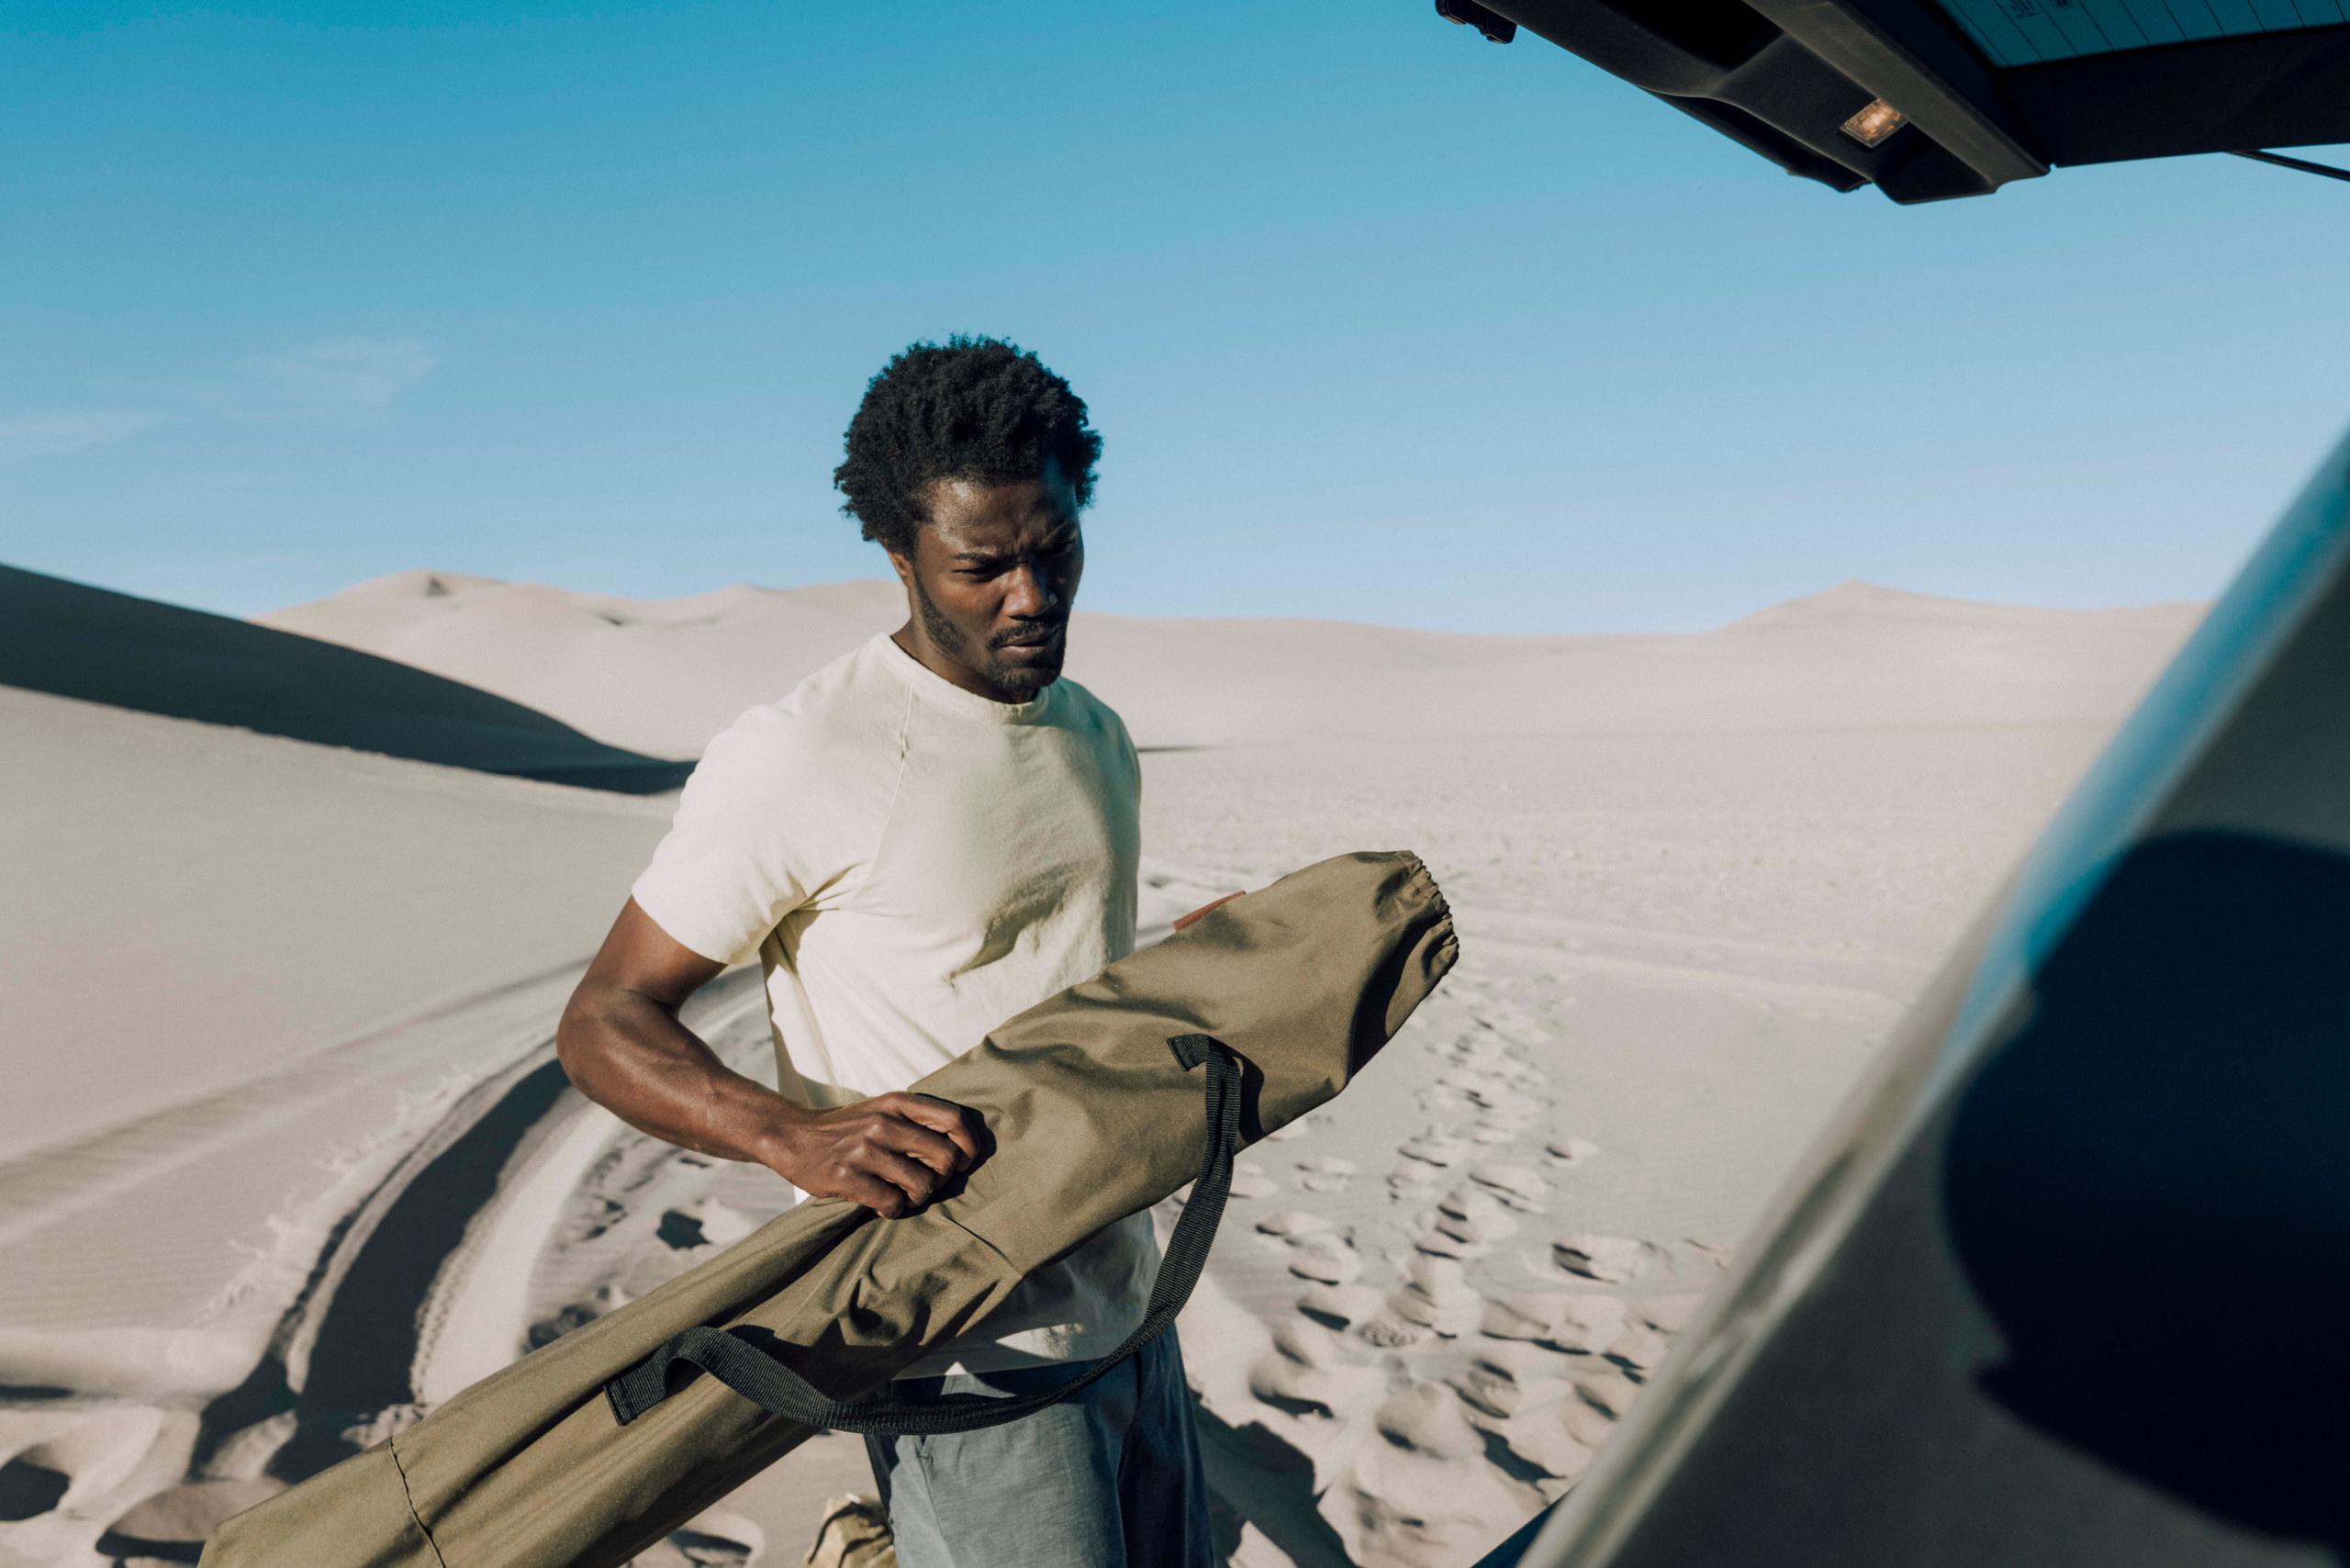 Man in t-shirt putting tent duffle into truck in the middle of sand dunes desert